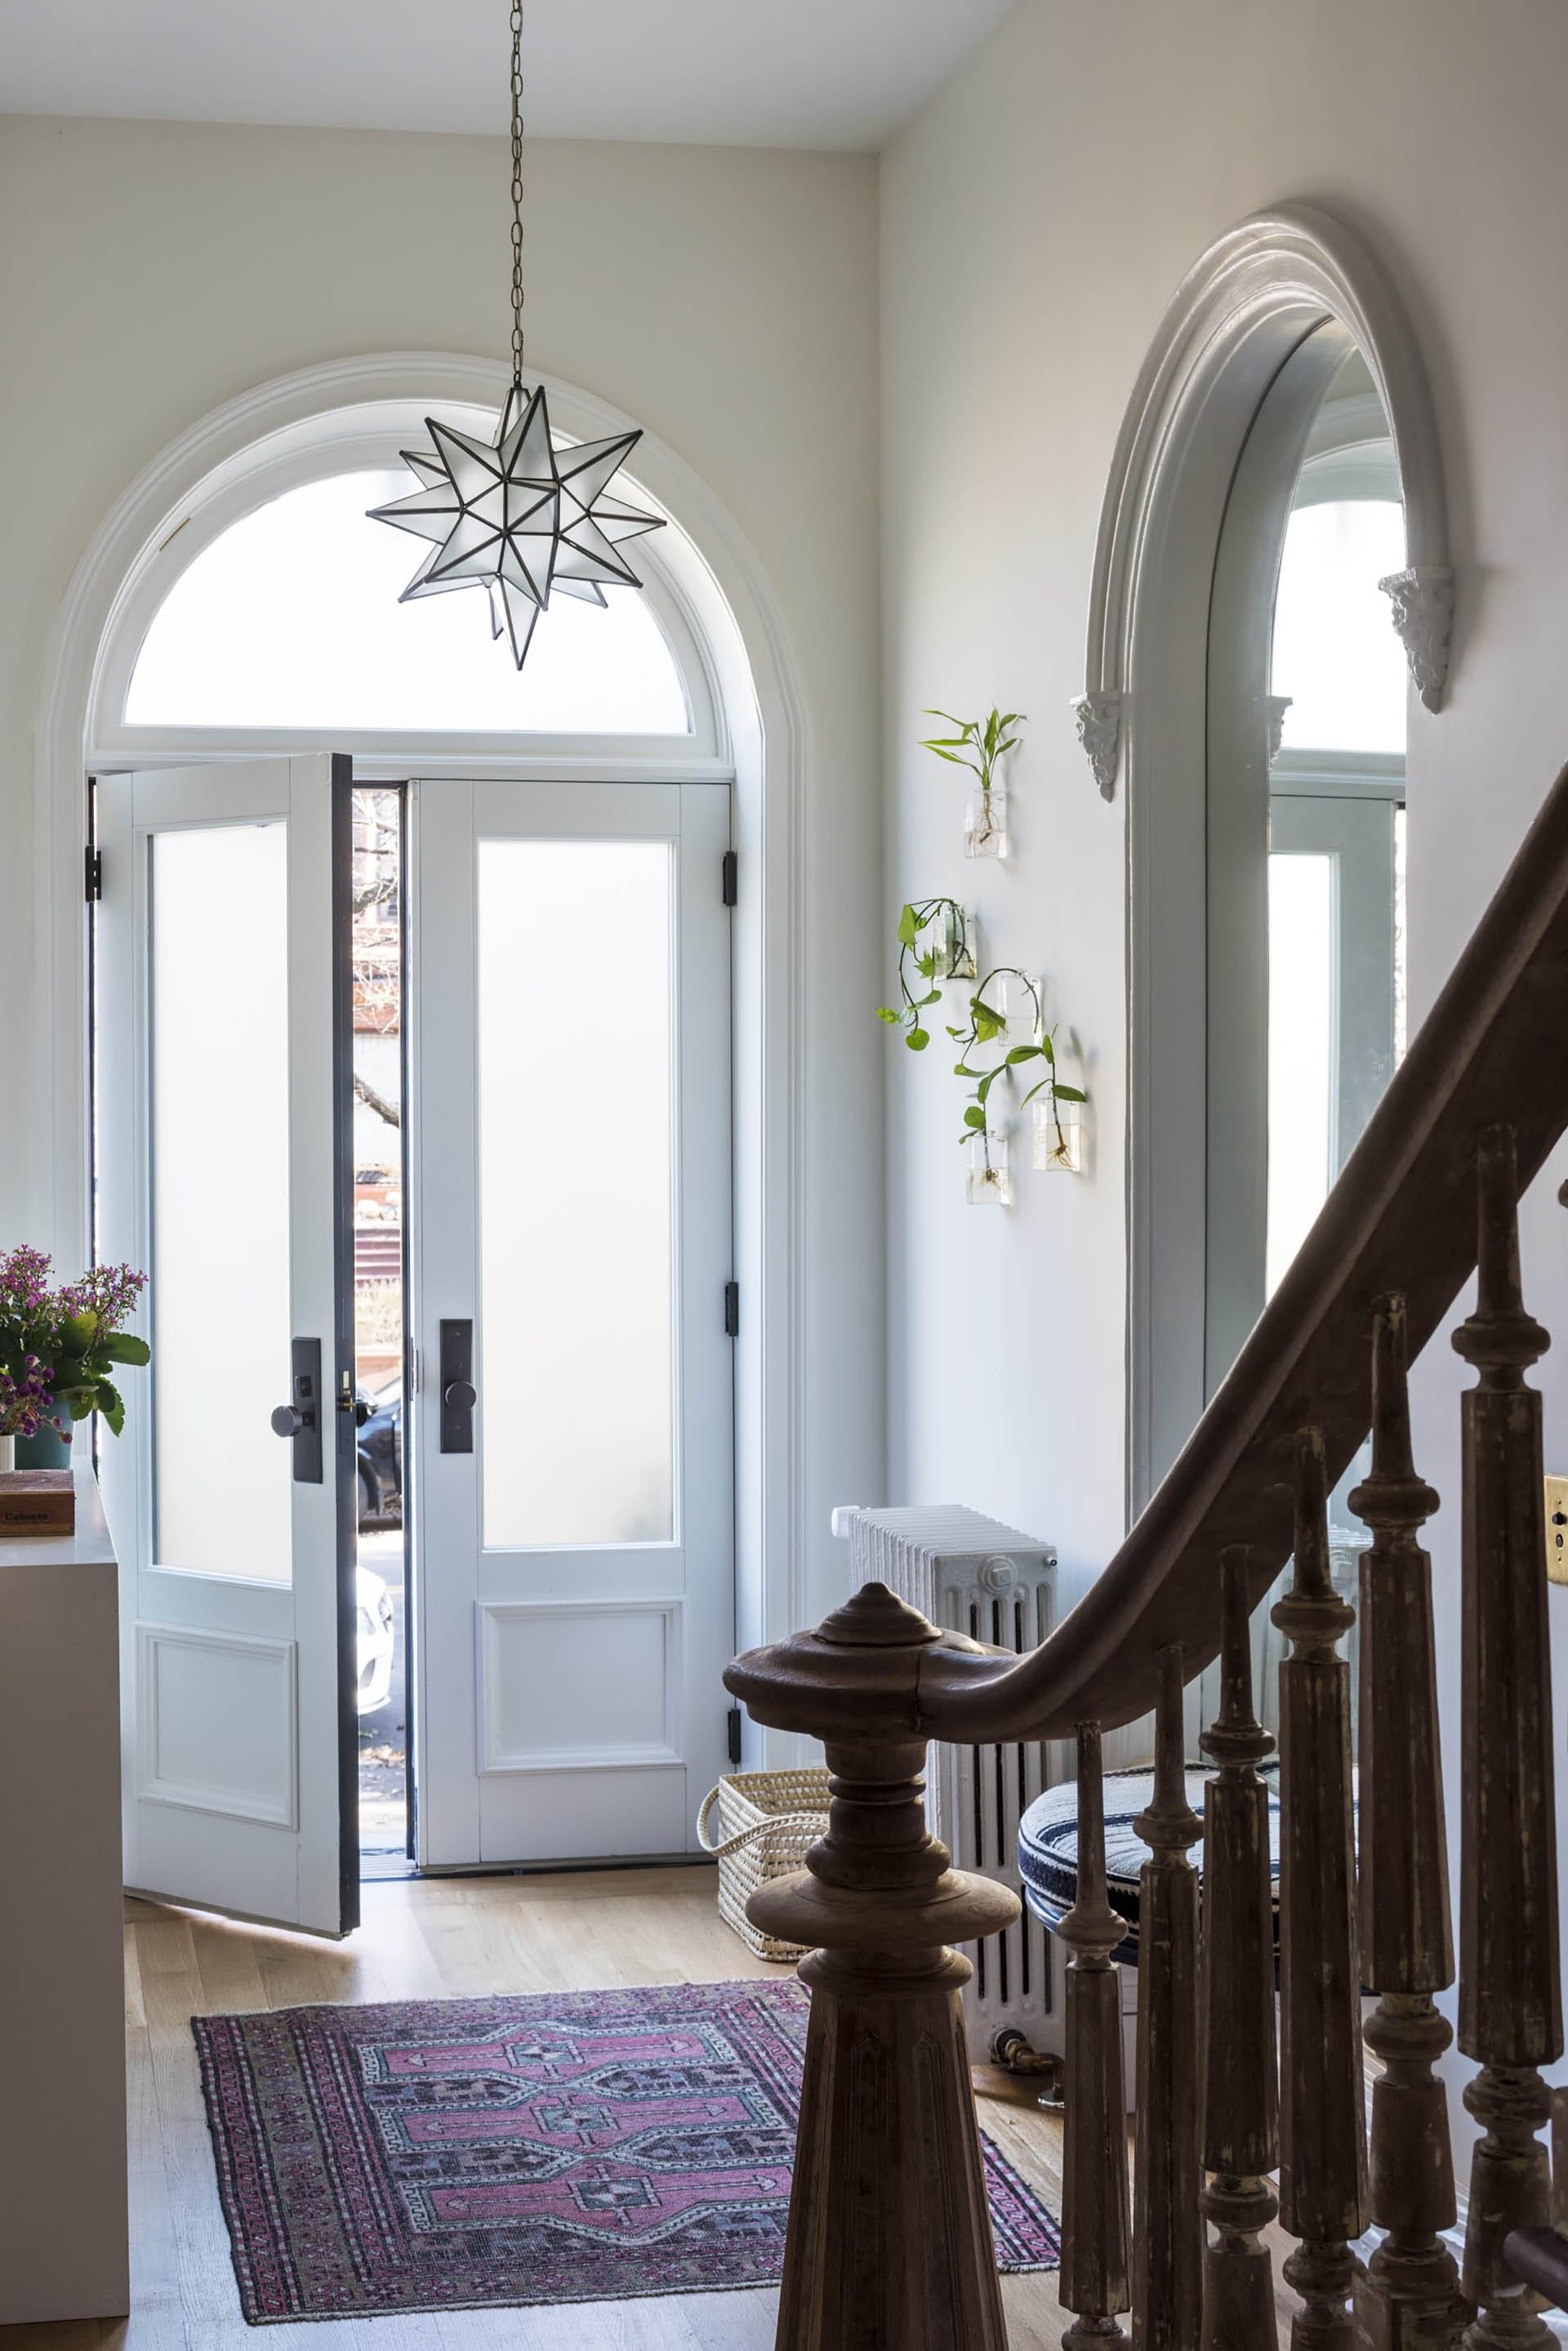 Entryway of a Clinton Hill rowhome with recreated historic doors and transom, geometric light fixture, and historic newel and railing in the foreground.